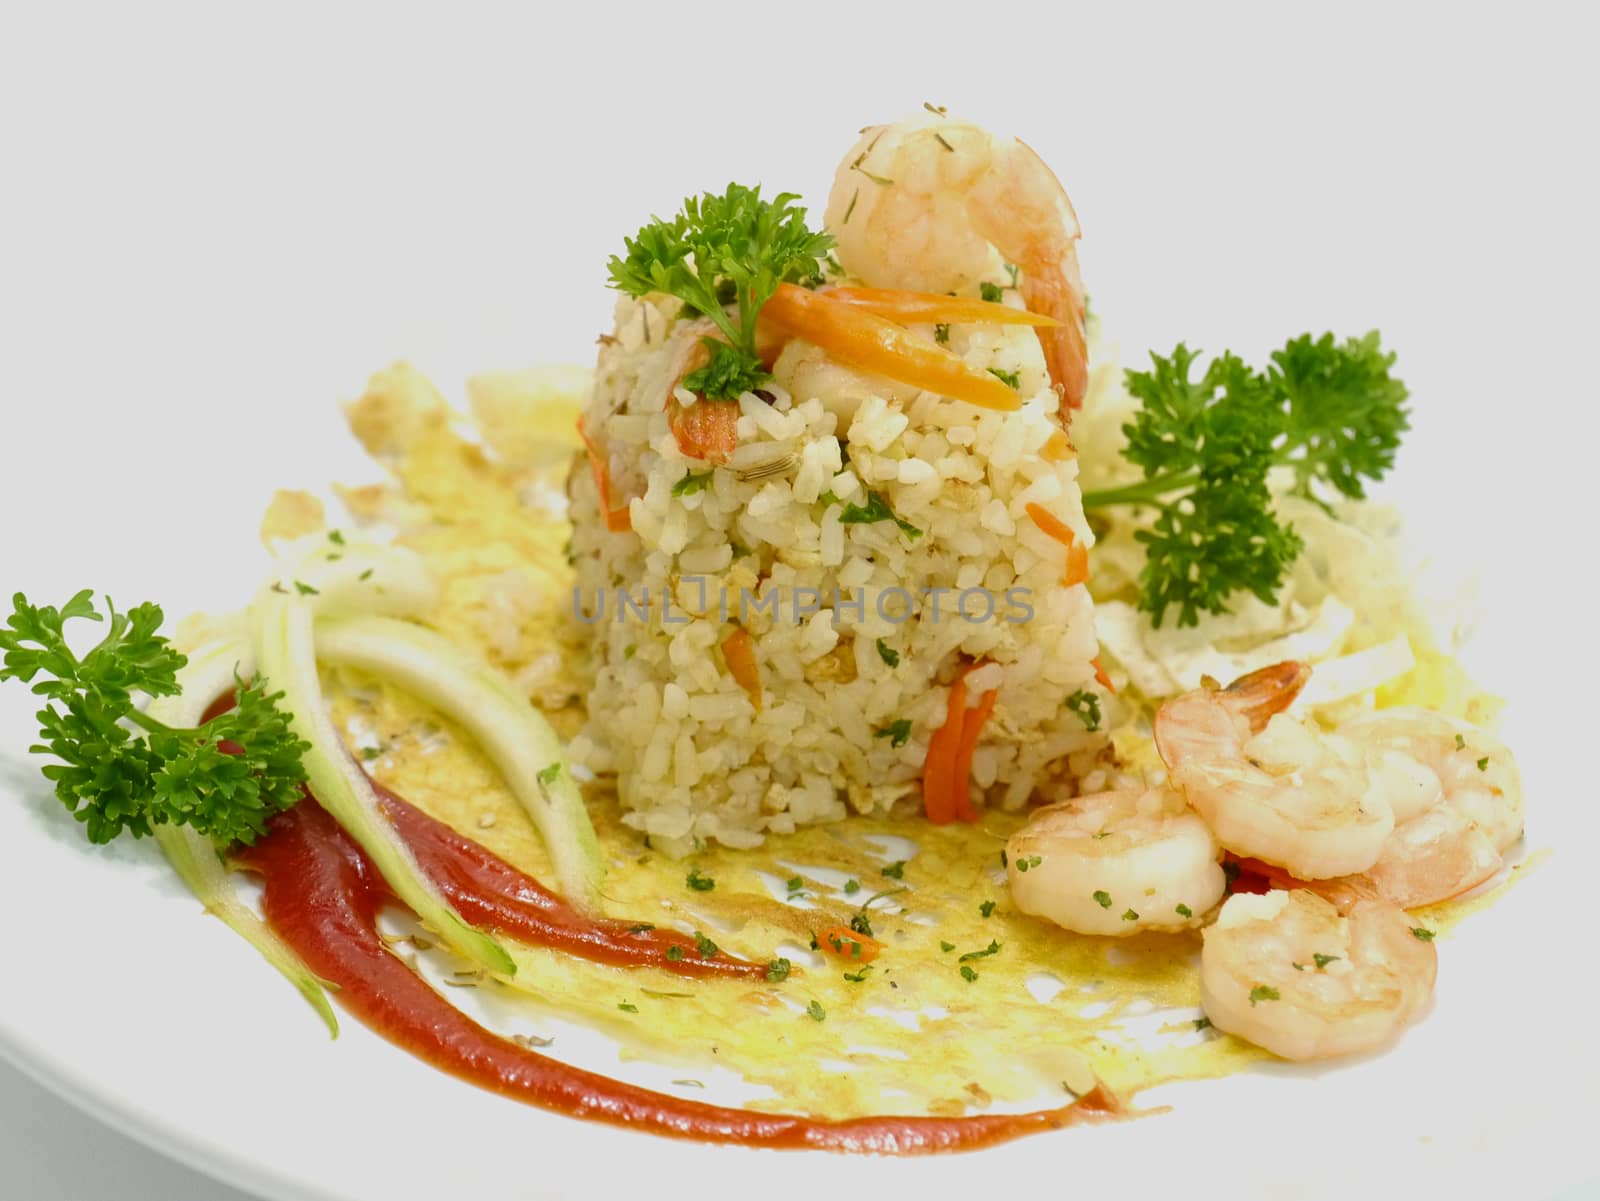 Fried rice with shrimp and parsley leaves.